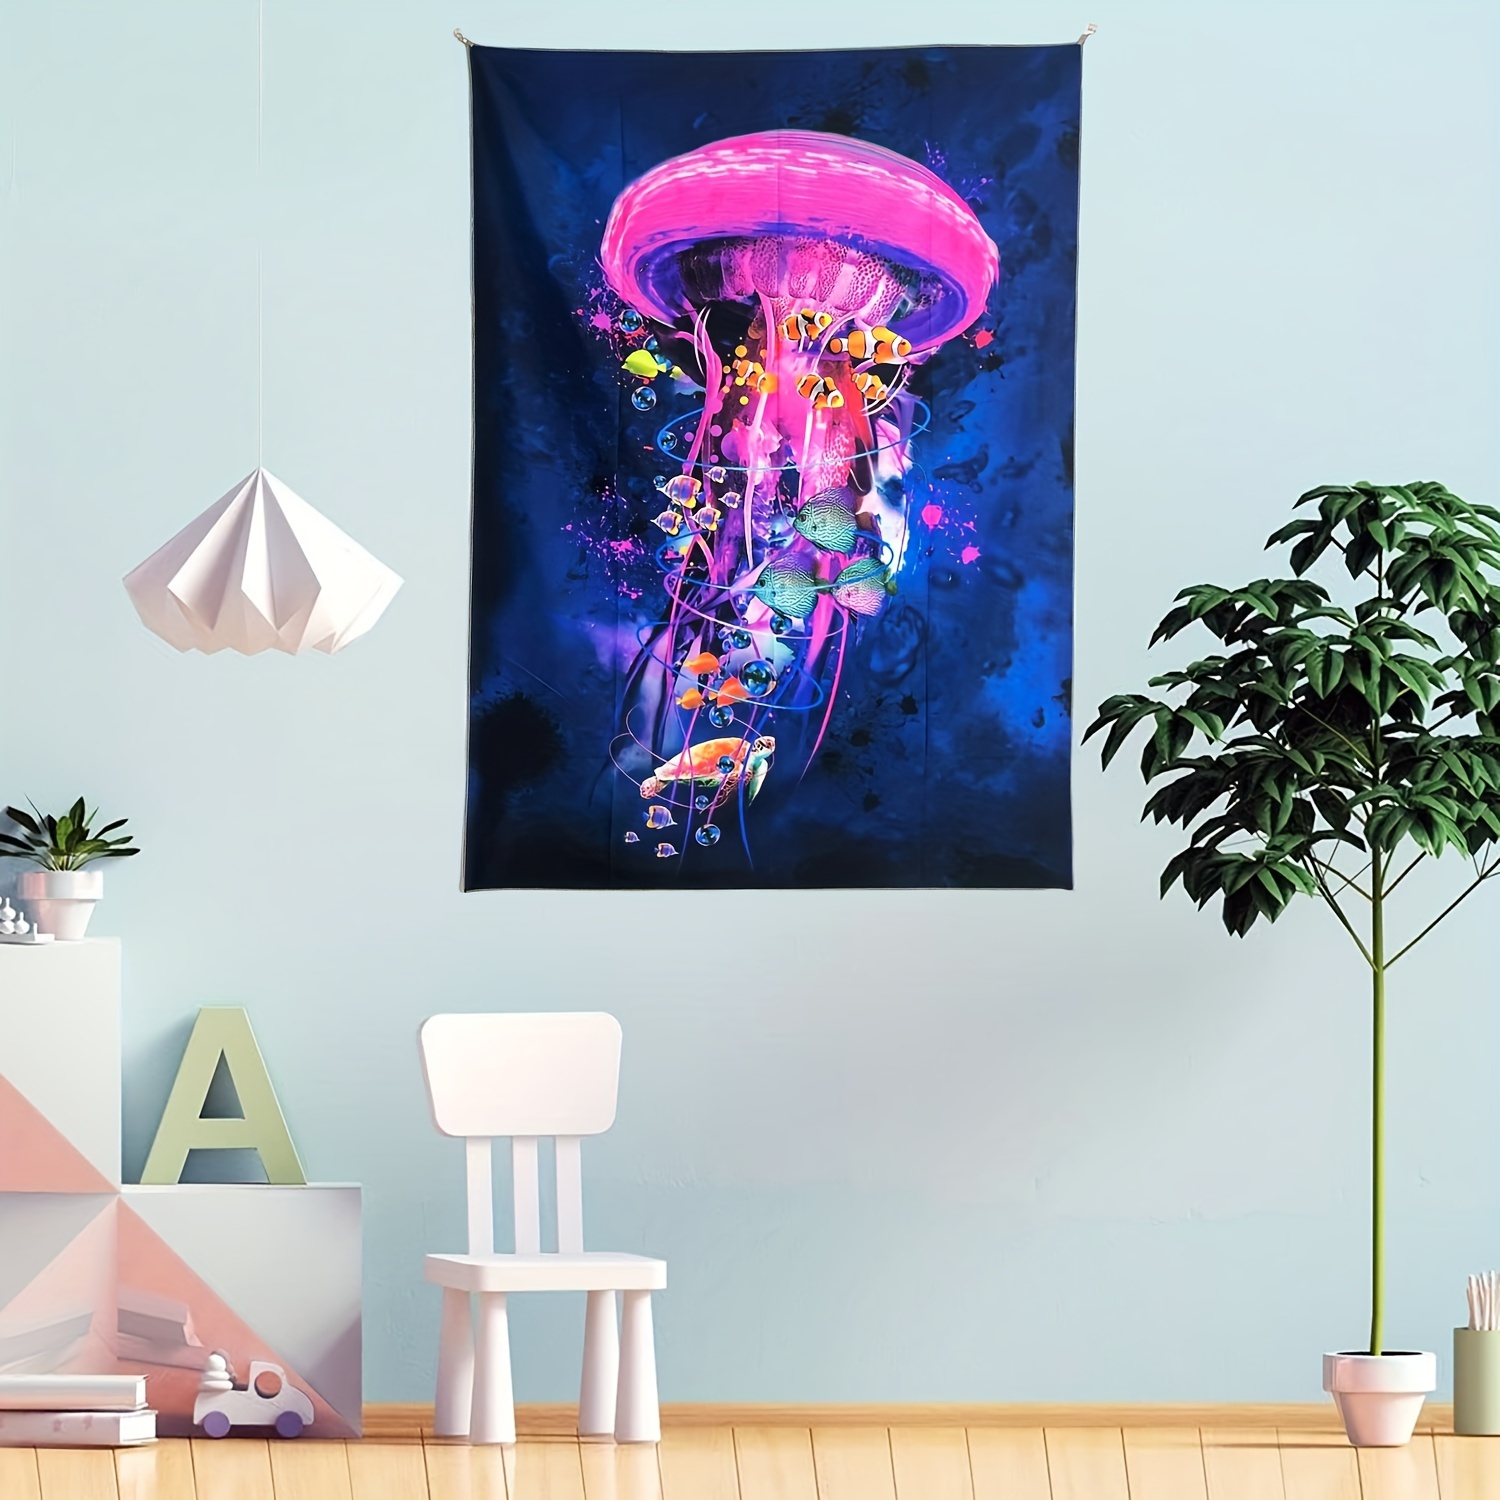 Galaxy Tentacles - Paint Pour Art - Unique and Vibrant Modern Home Decor  for enhancing the living room, bedroom, dorm room, office or interior.  Digitally manipulated acrylic painting. Art Board Print for